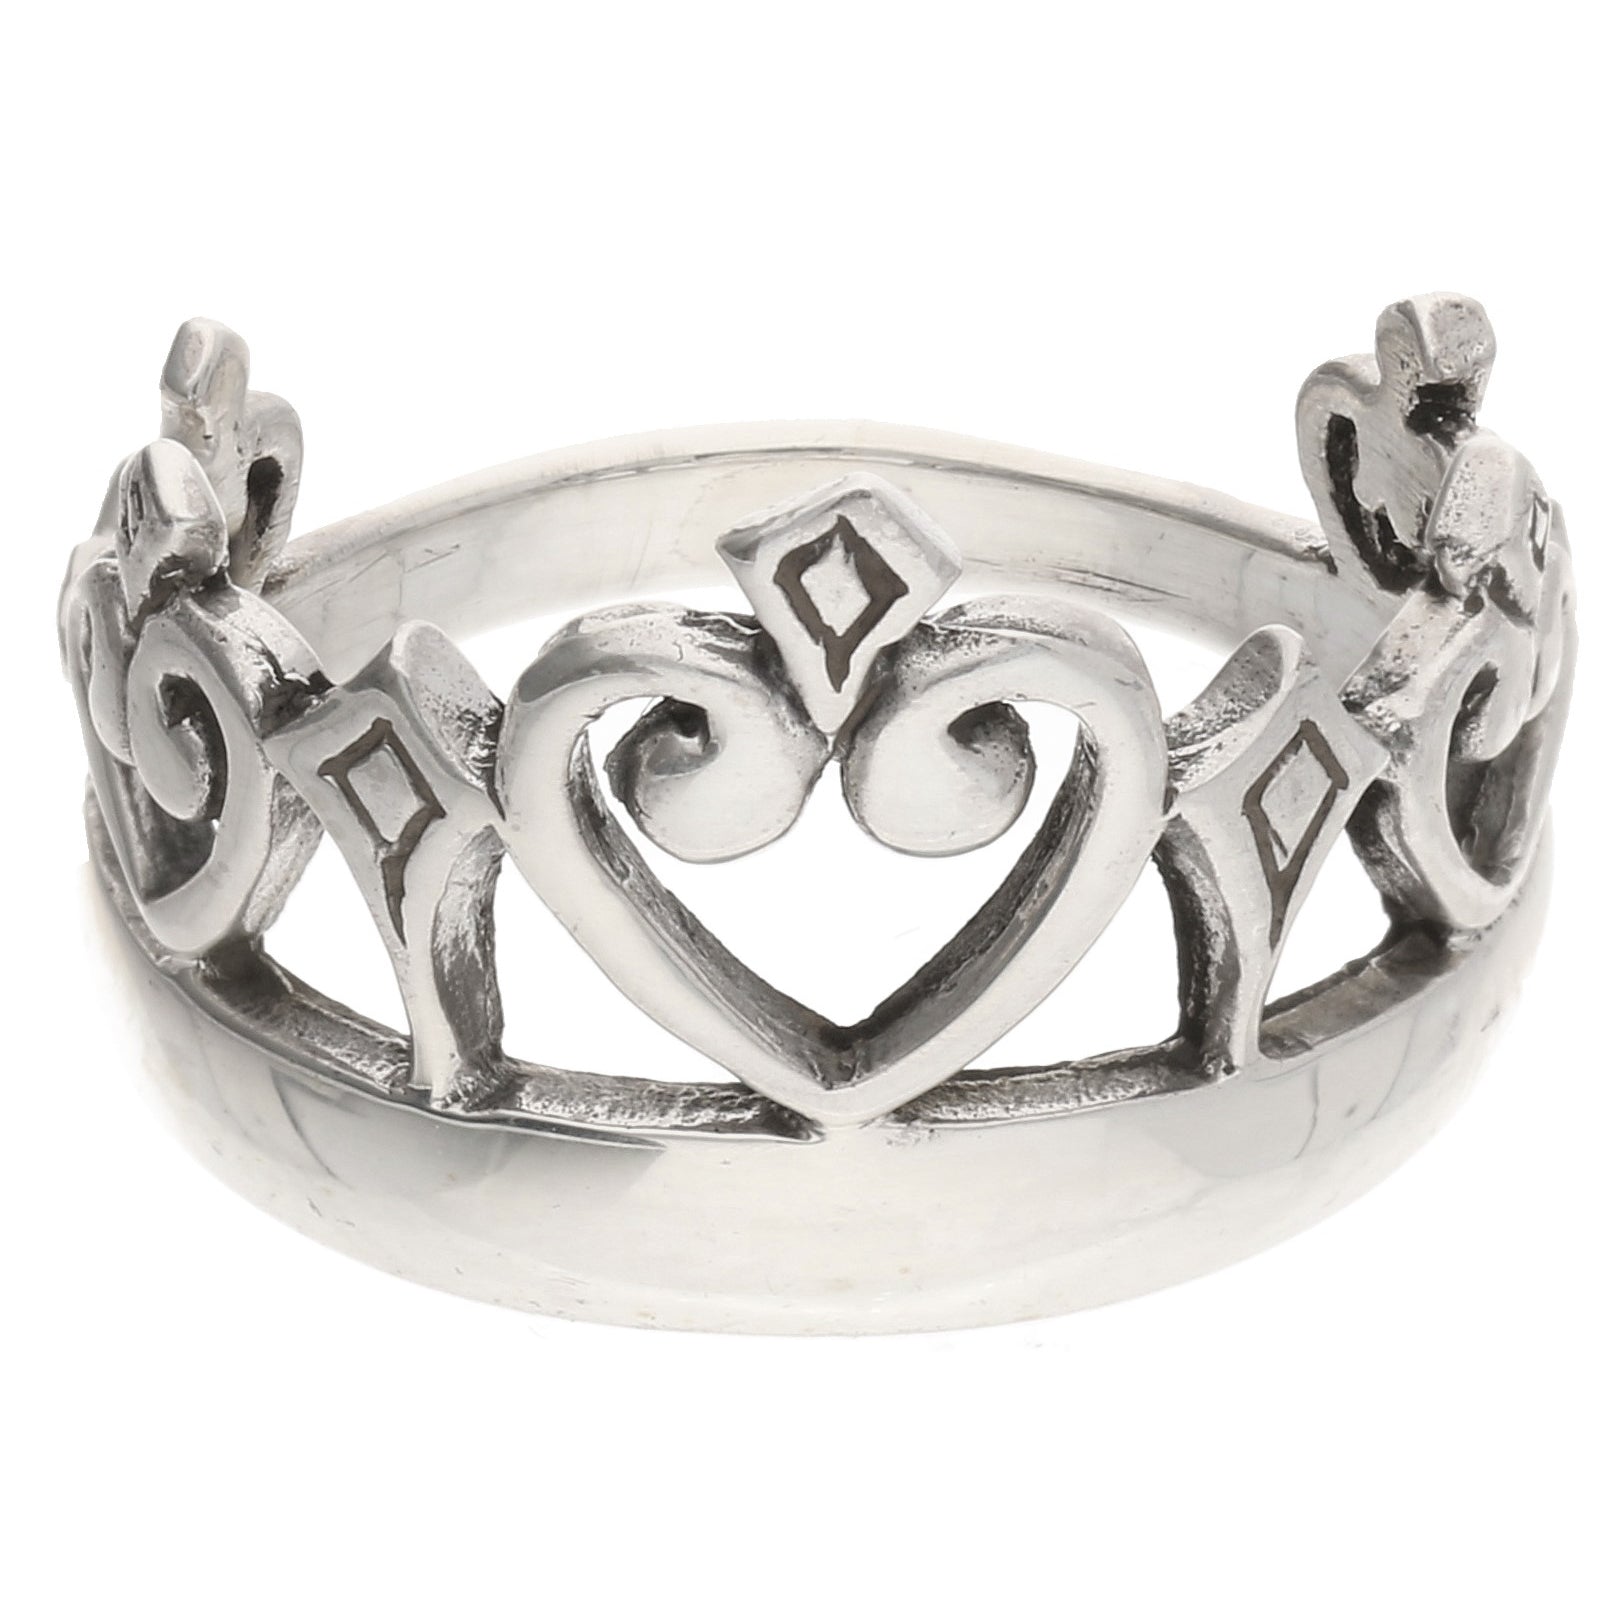 Miss America Princess Crown Sterling Silver Ring - Silver Insanity